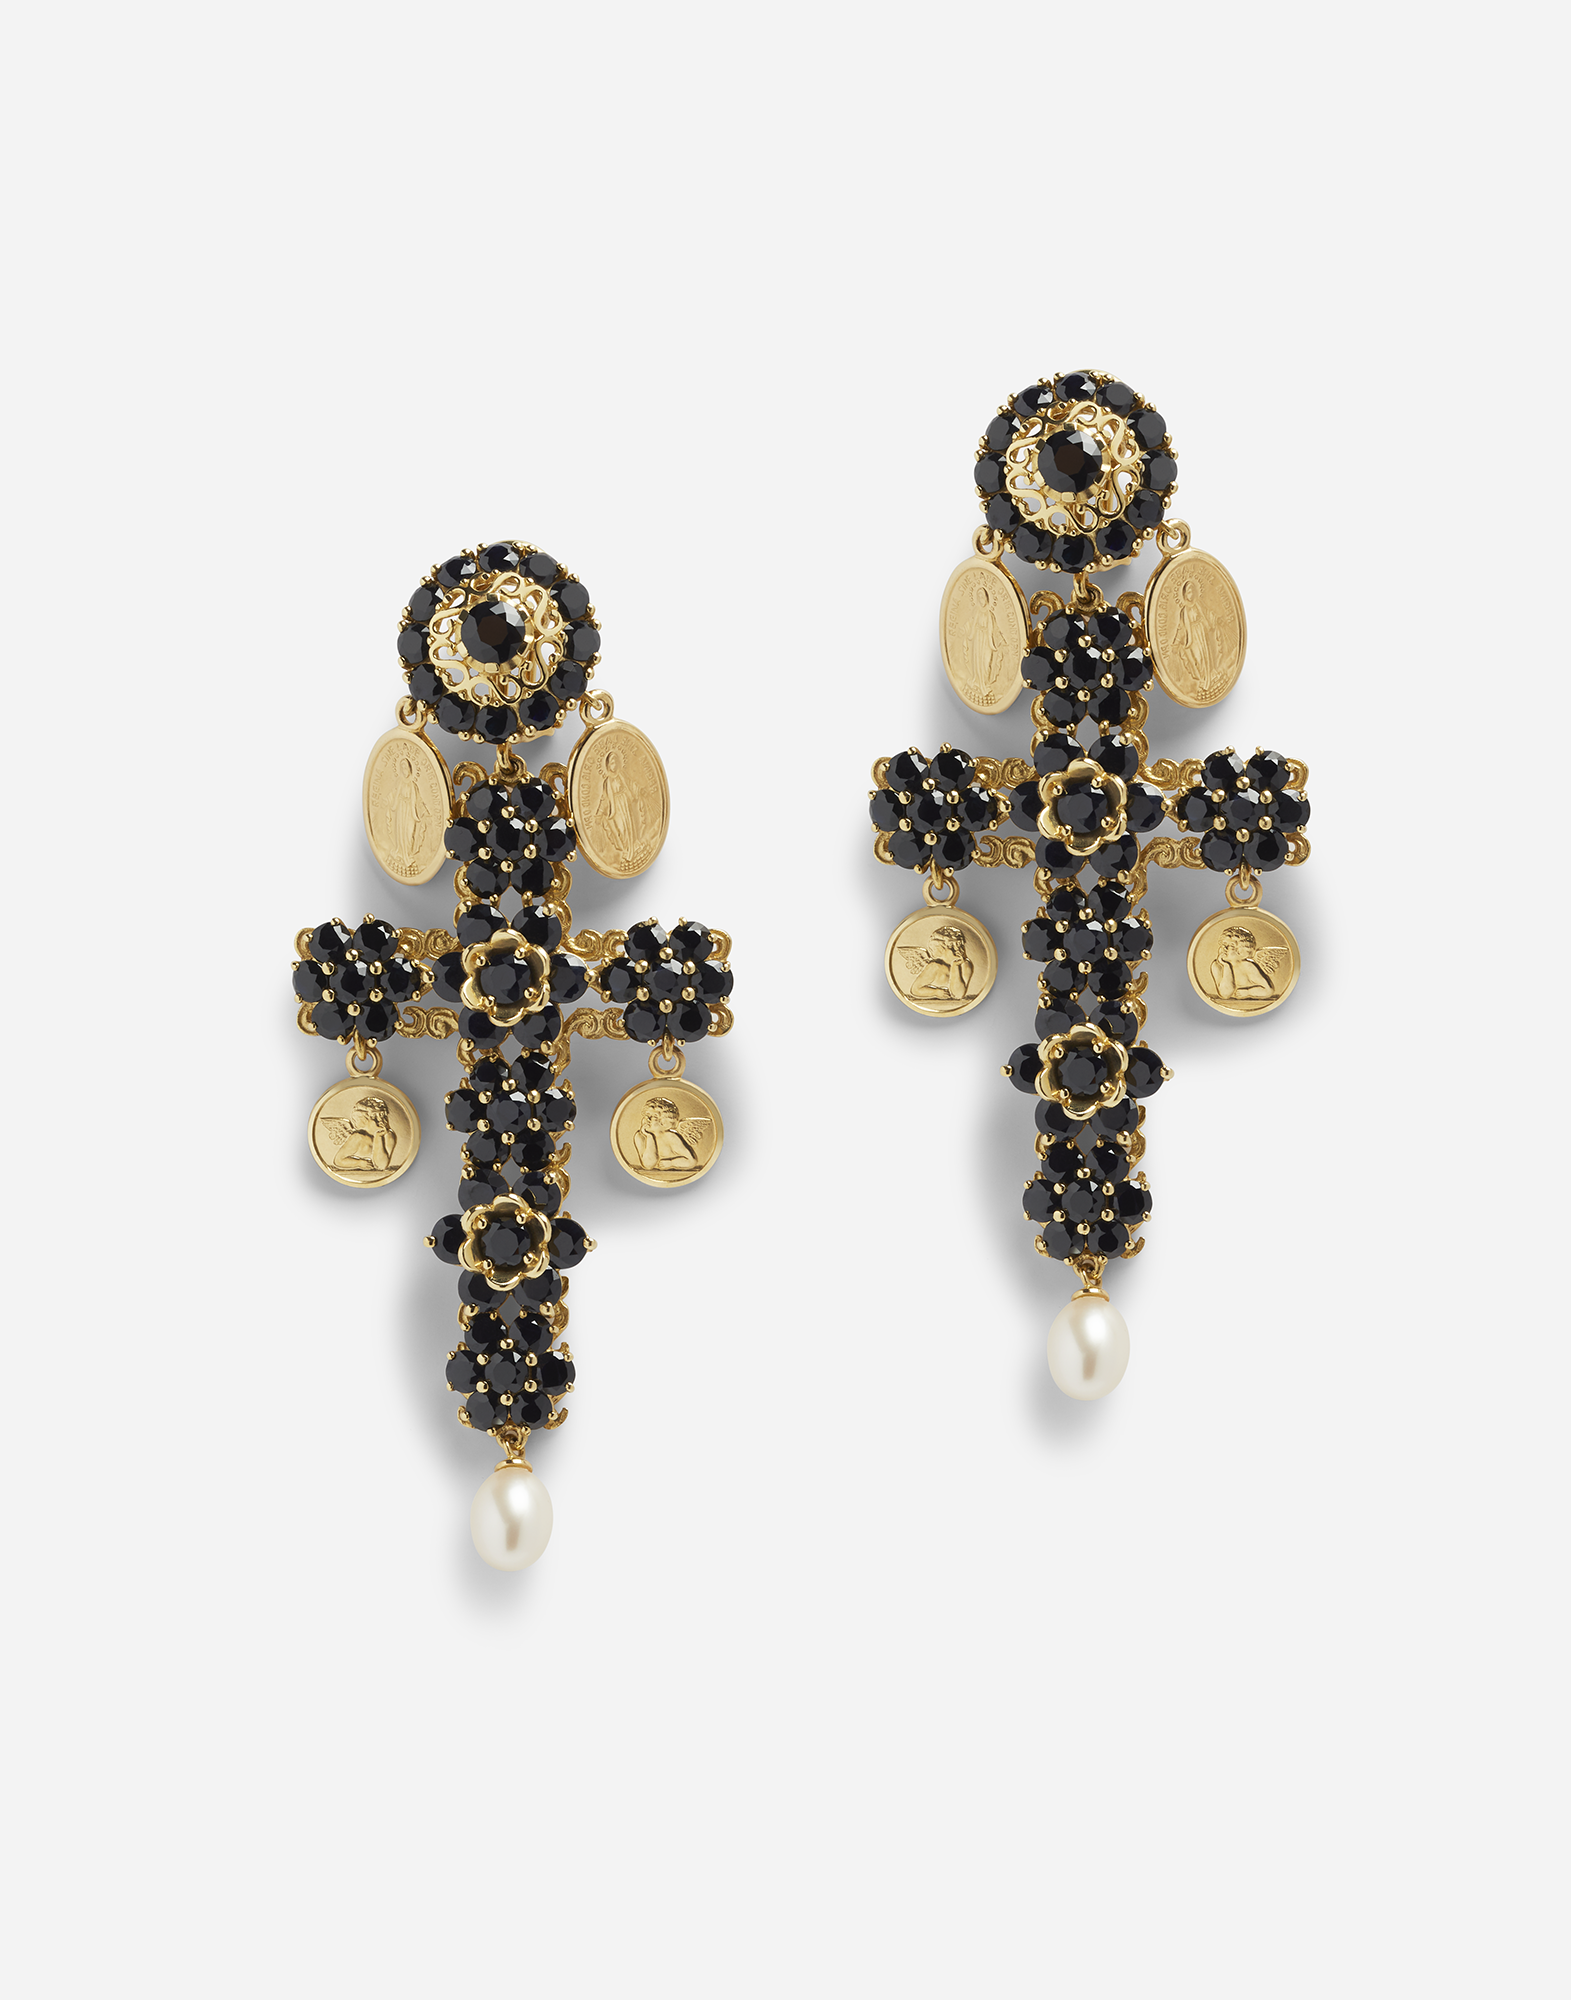 Cross earrings with sapphires and medallions in Gold/Black